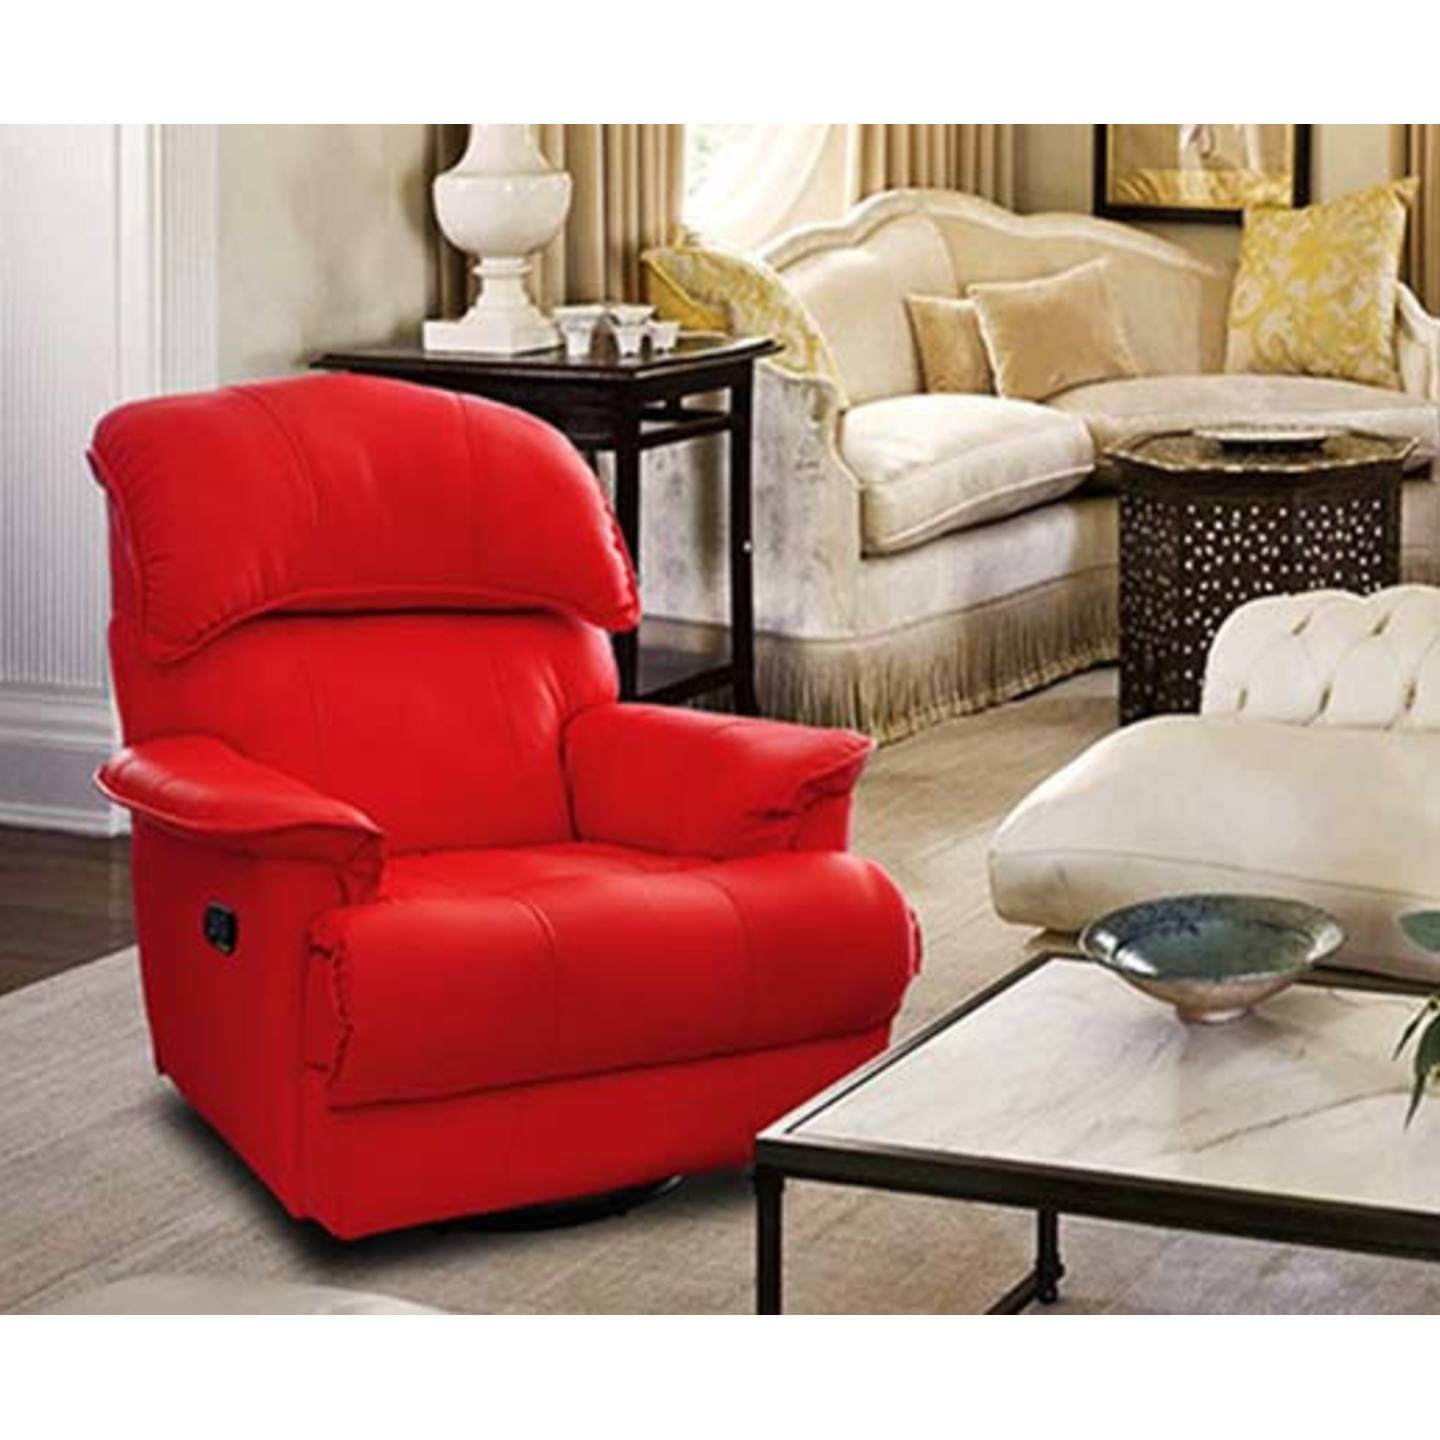 LN Recliner Chair Livo Manual System In Red Colour